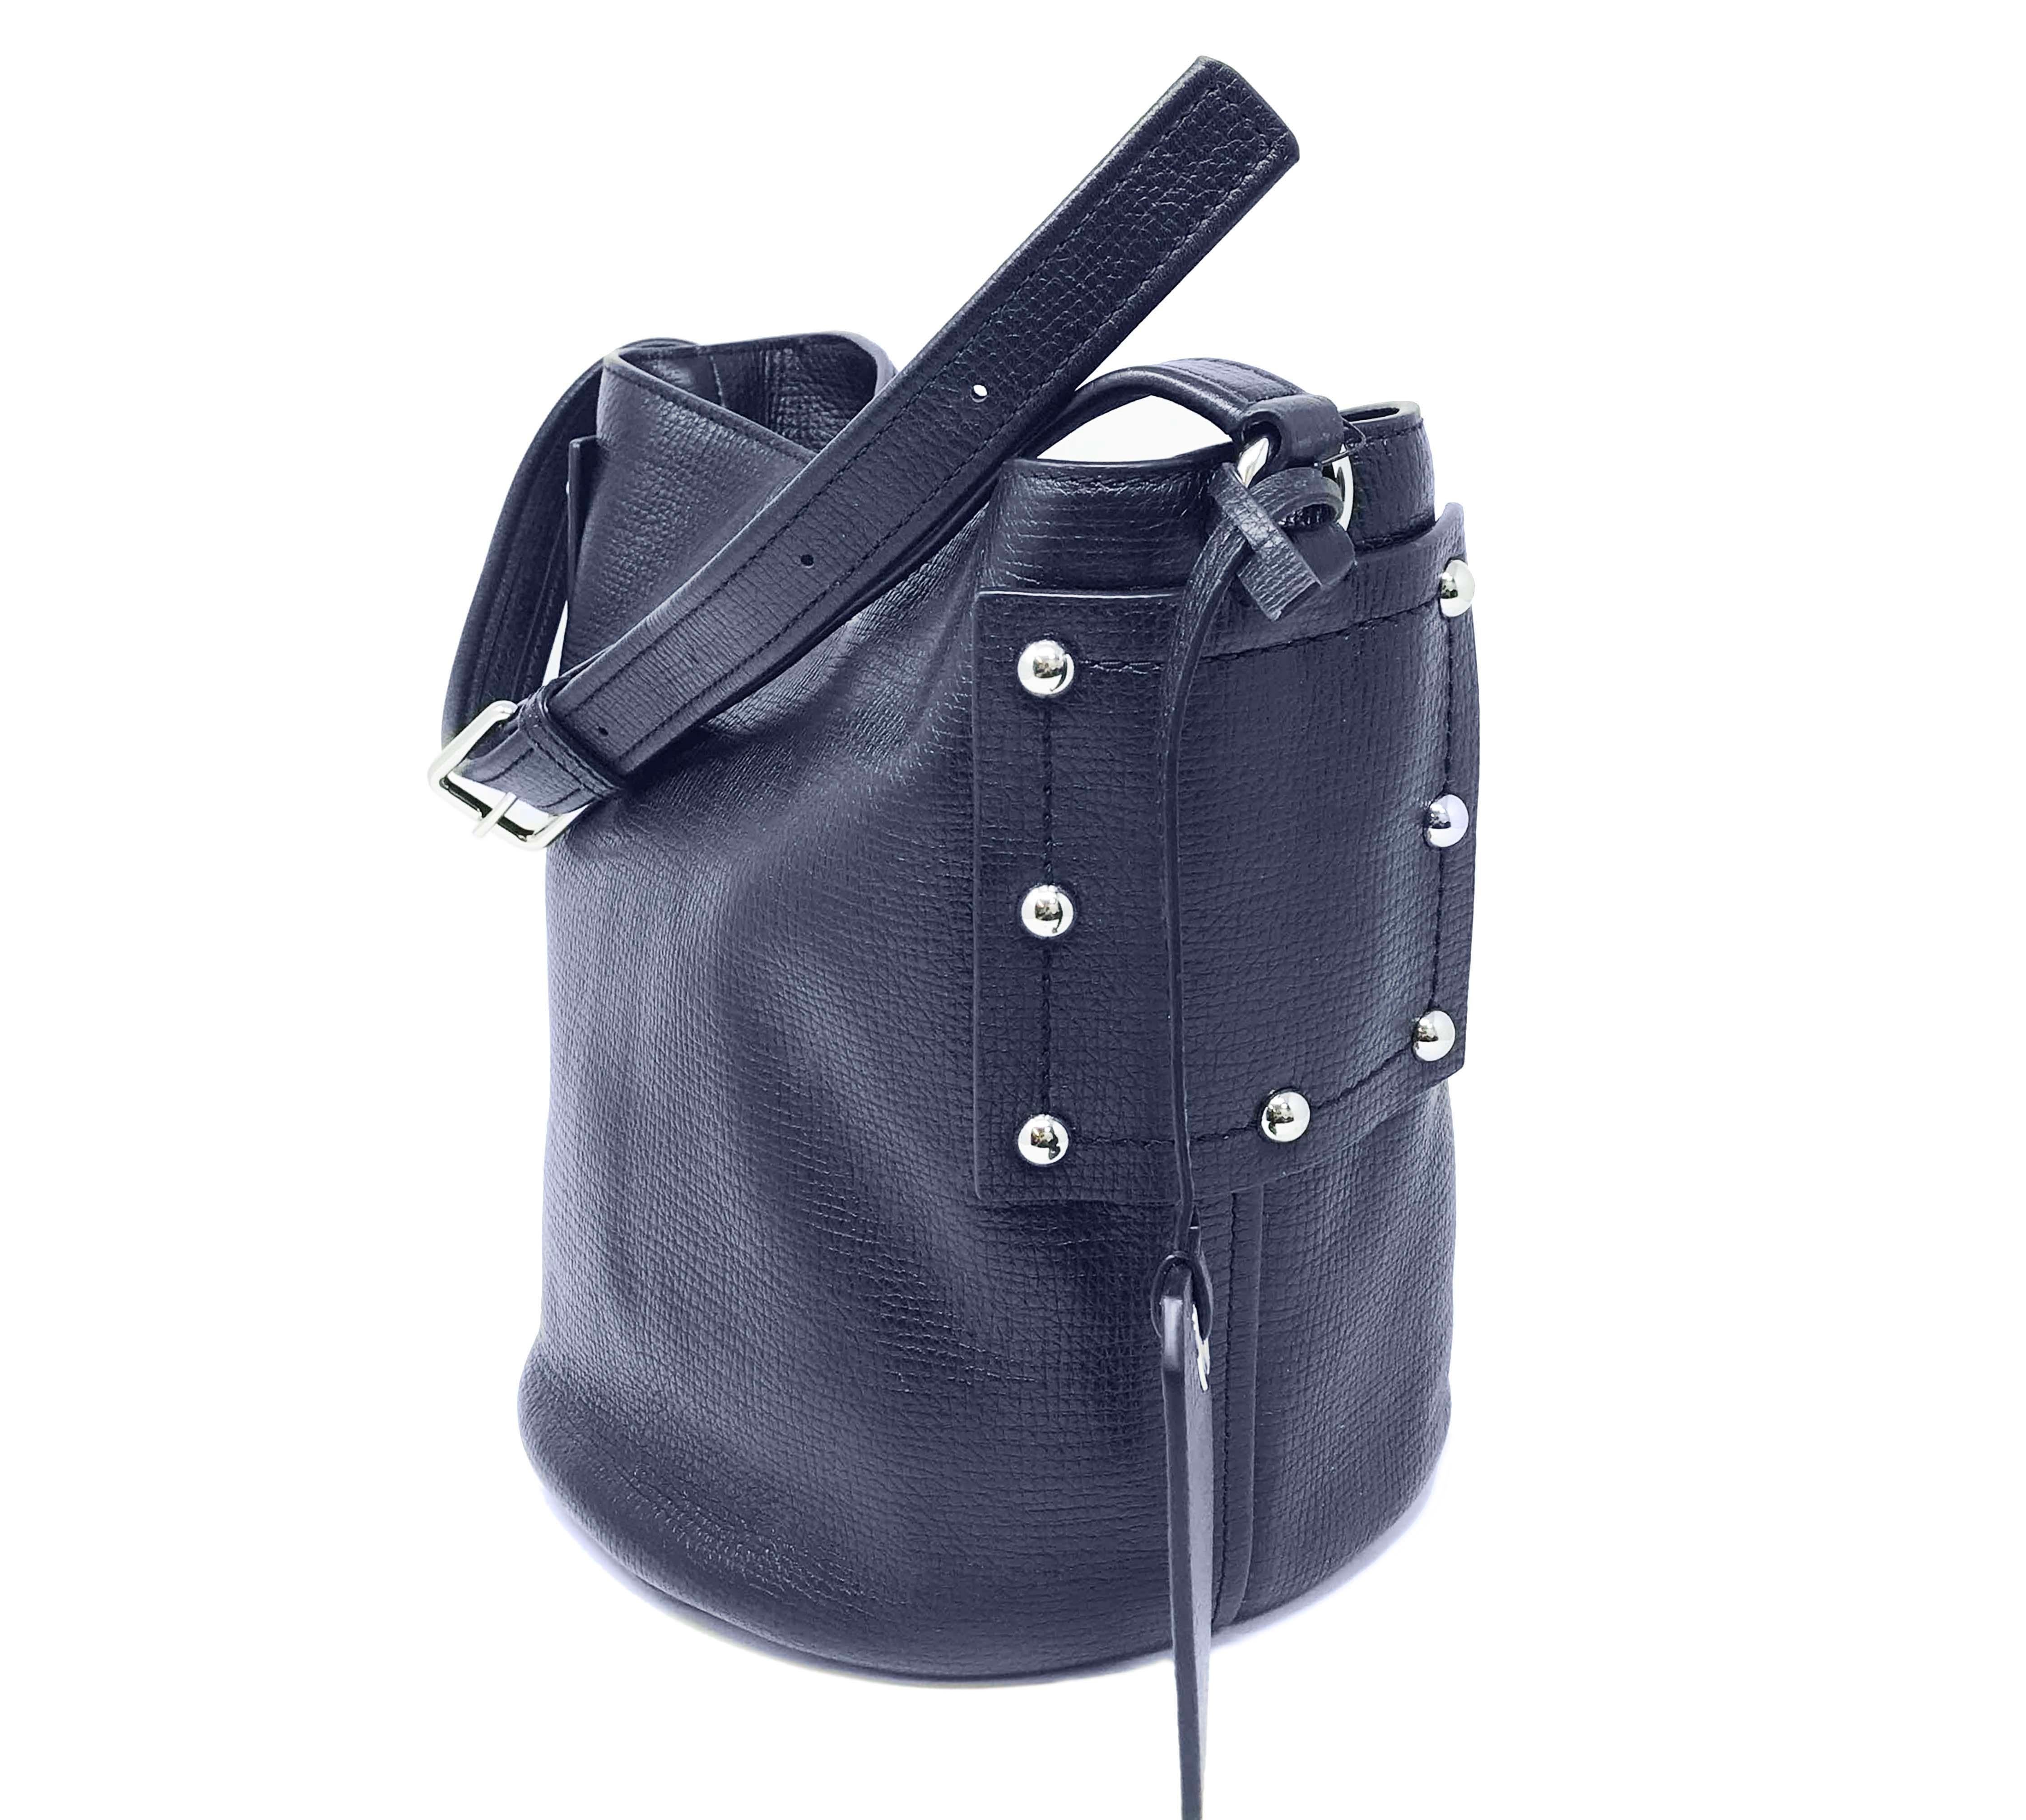 This is New Without Tags Marc By Marc Jacobs M0007255-484 C Lock Bucket Navy Blue Crossbody Women's Bag. Adjustable Strap. Dustbag is not included. Dimensions: L: 13 In; H: 10 In; D: 8 In.